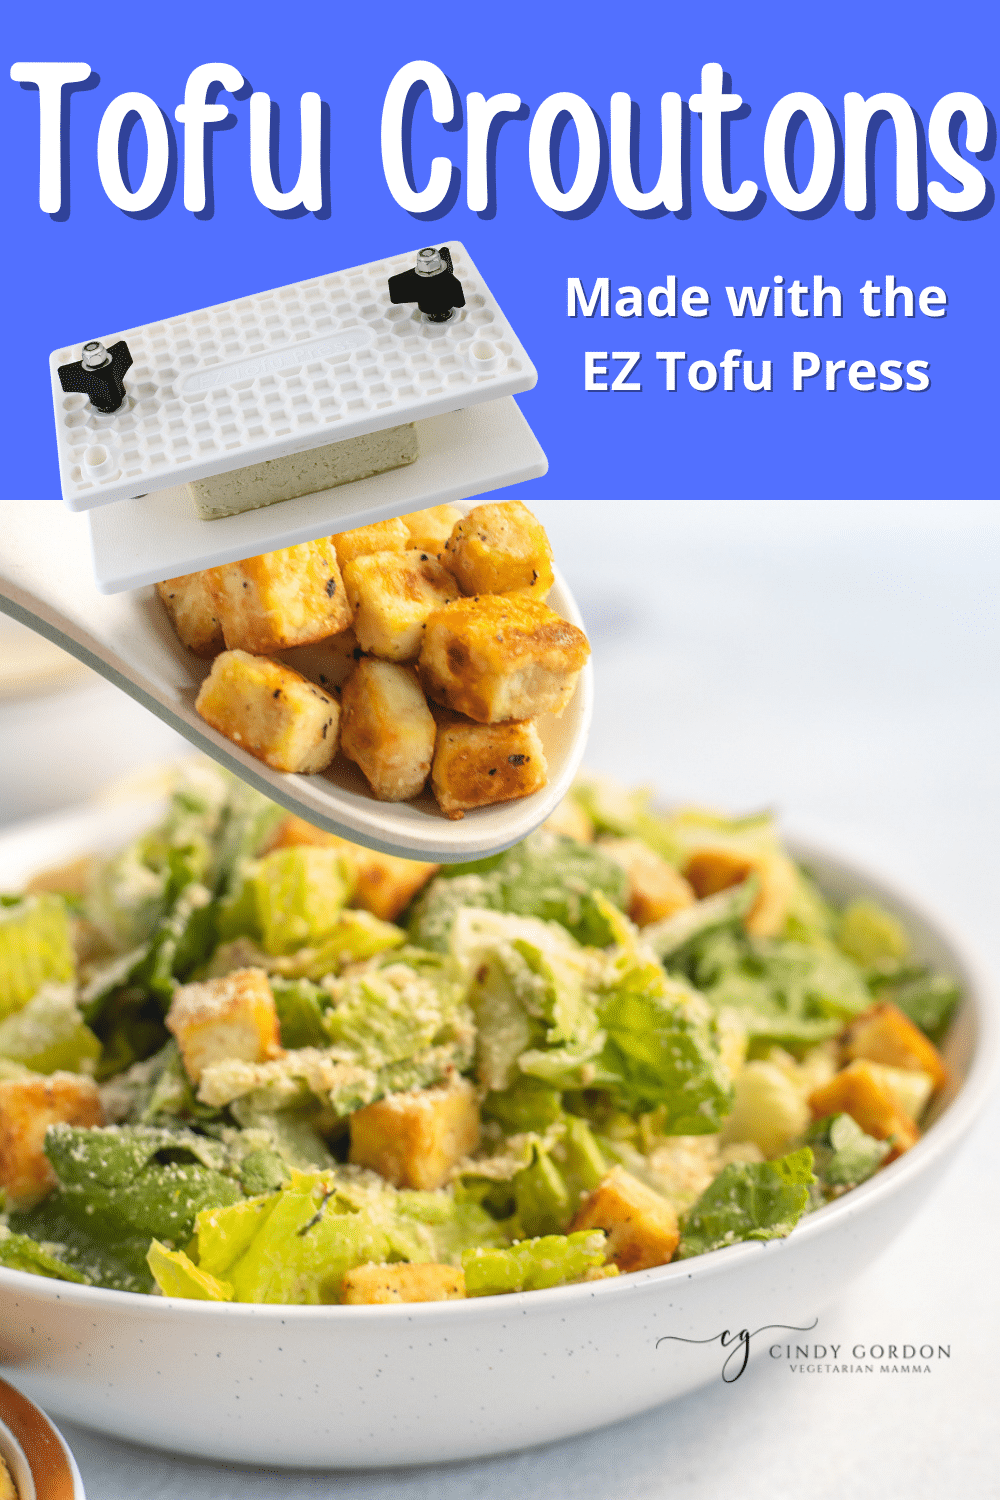 Tofu croutons are the crunchy topping your salads need! These simple vegan croutons are crispy and golden brown with a delicious creamy center.